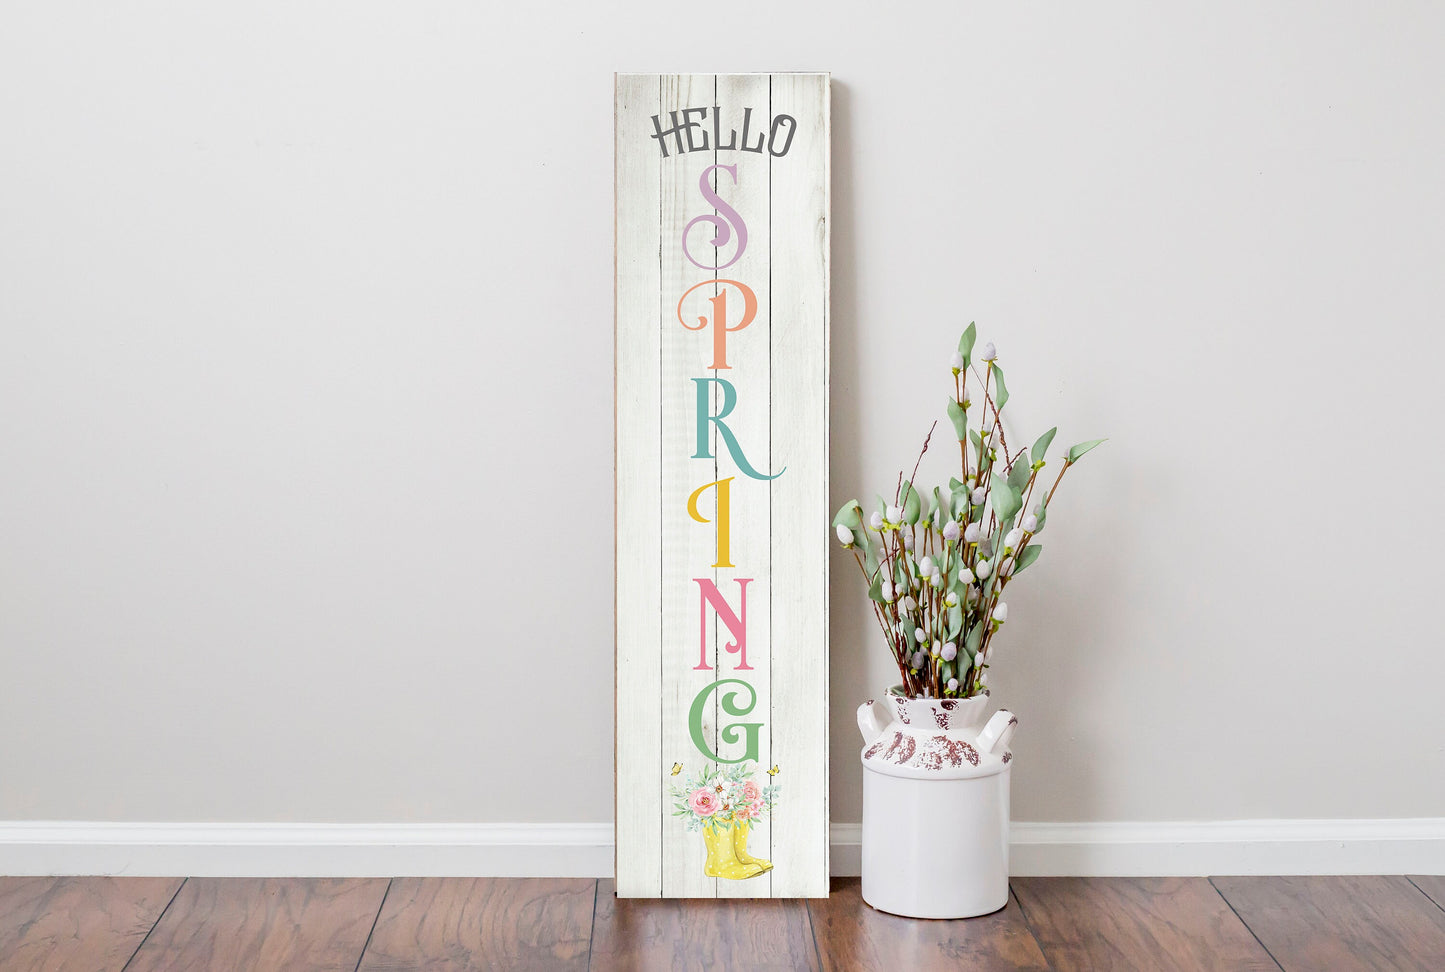 24 Inch (2 Foot Tall) Hello Spring Rubber Boots Vertical Wood Print Sign